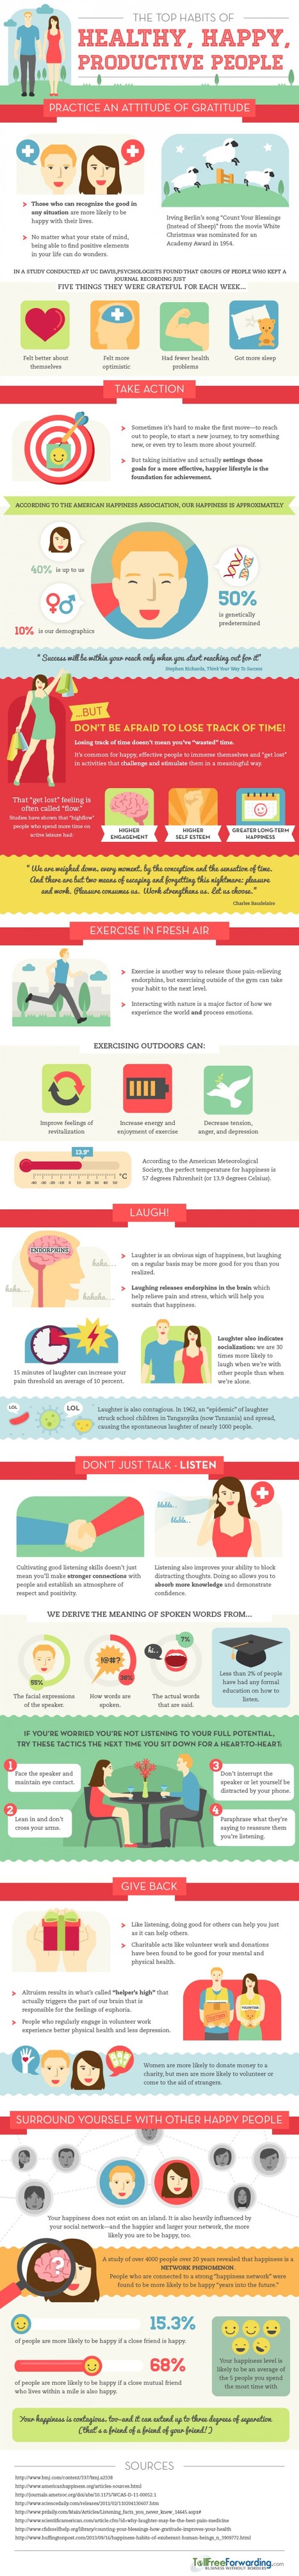 Infographic: The Top Habits Of Healthy, Happy, Productive People | 21st Century Learning and Teaching | Scoop.it